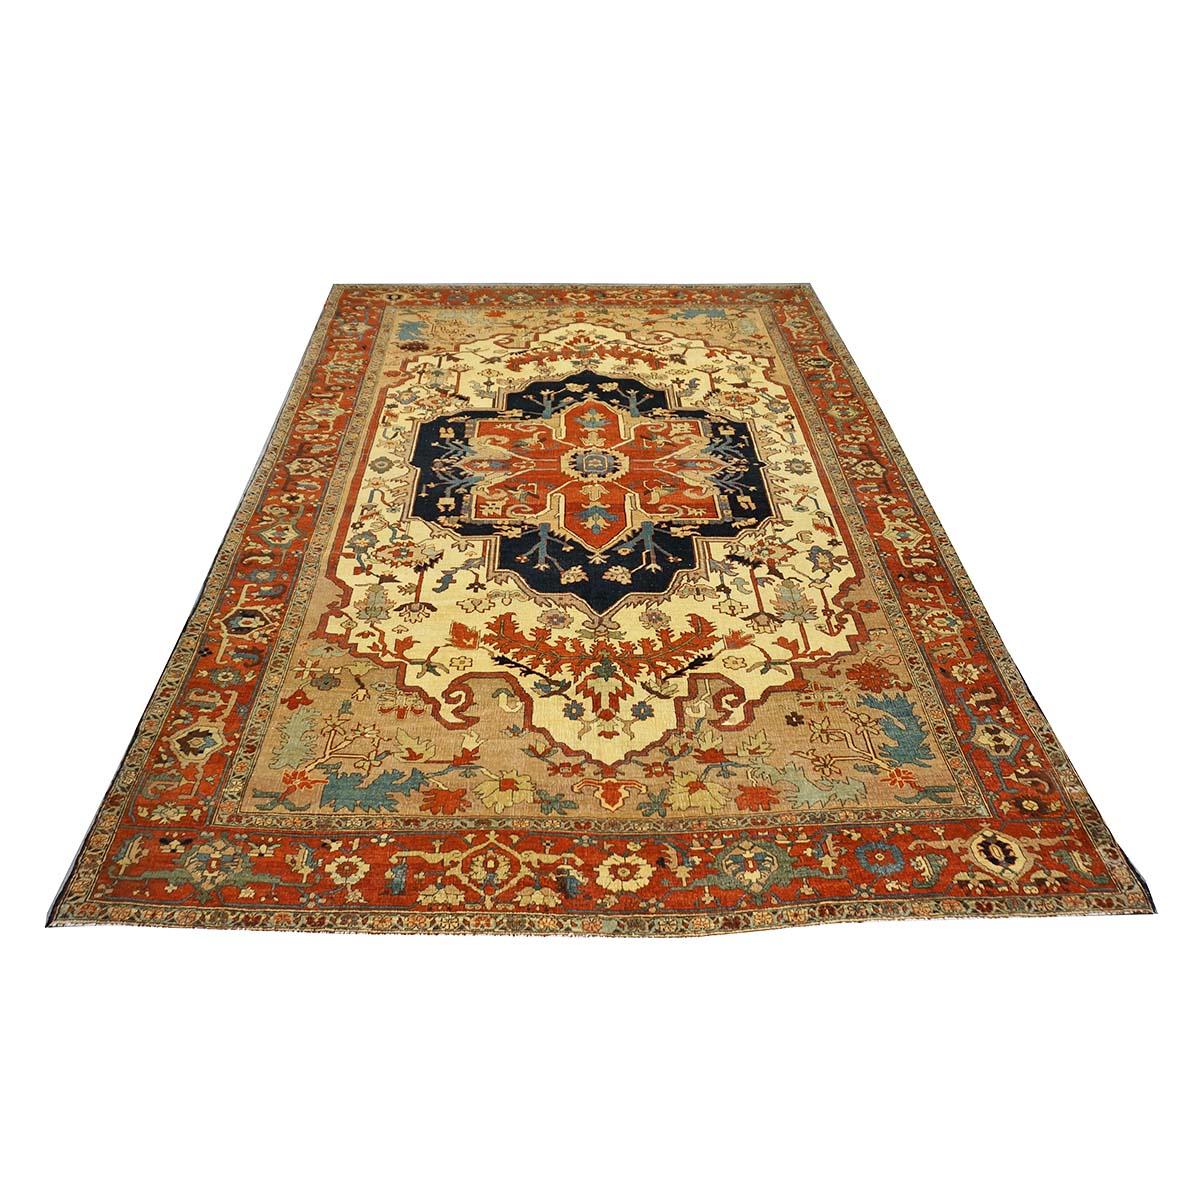 Persian Serapi 7x11 Rust, Ivory, Navy, & Tan Reprodcution Handmade Area Rug In Good Condition For Sale In Houston, TX